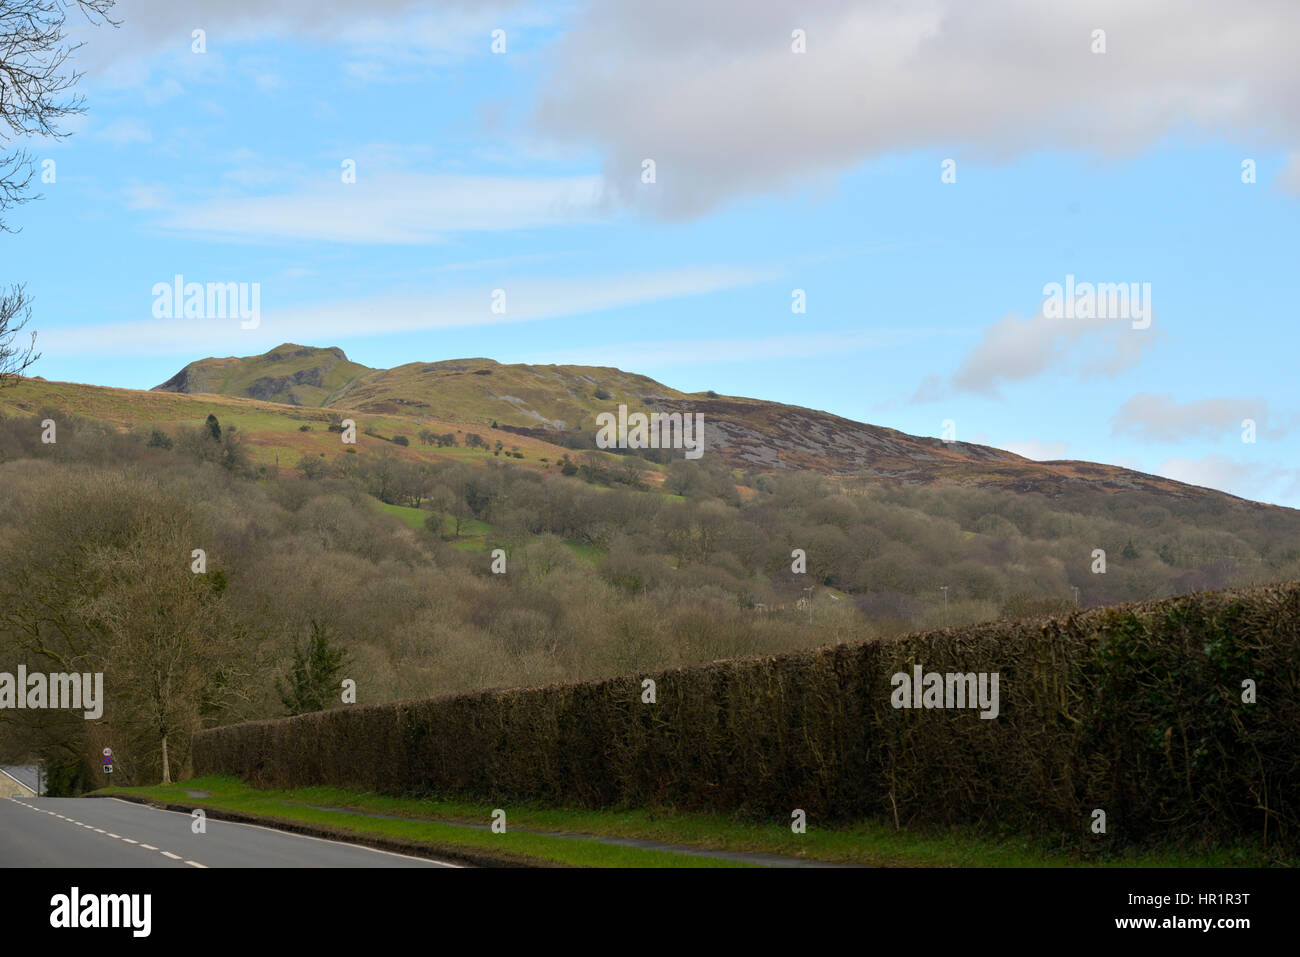 The Sleeping Giant, a Hill in the Brecon Beacons National Park Stock Photo